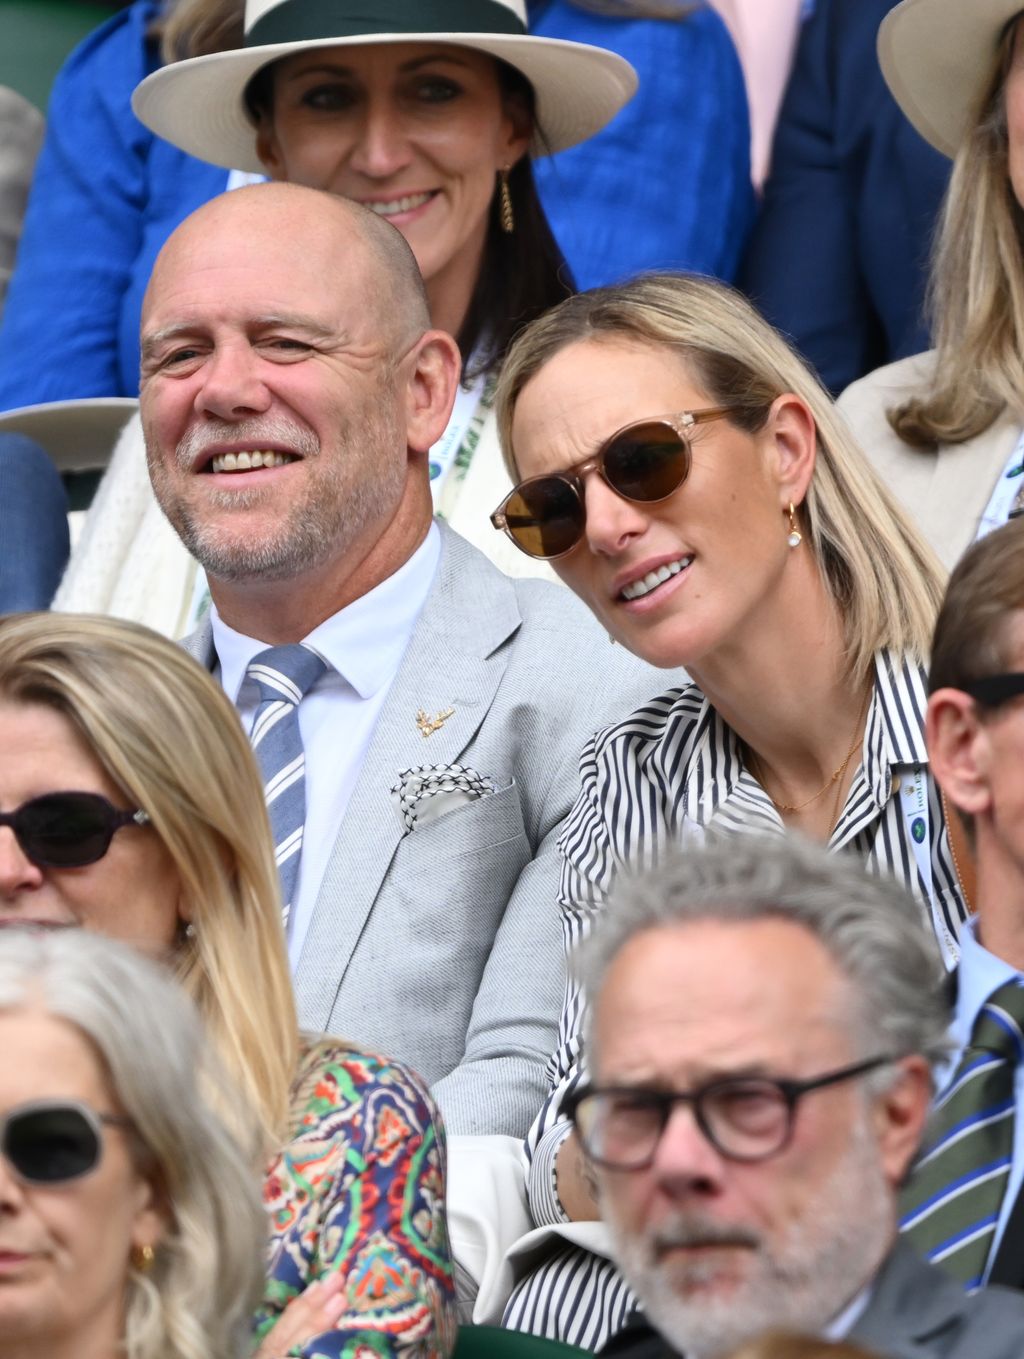 Mike and Zara did not sit in the royal box at Wimbledon